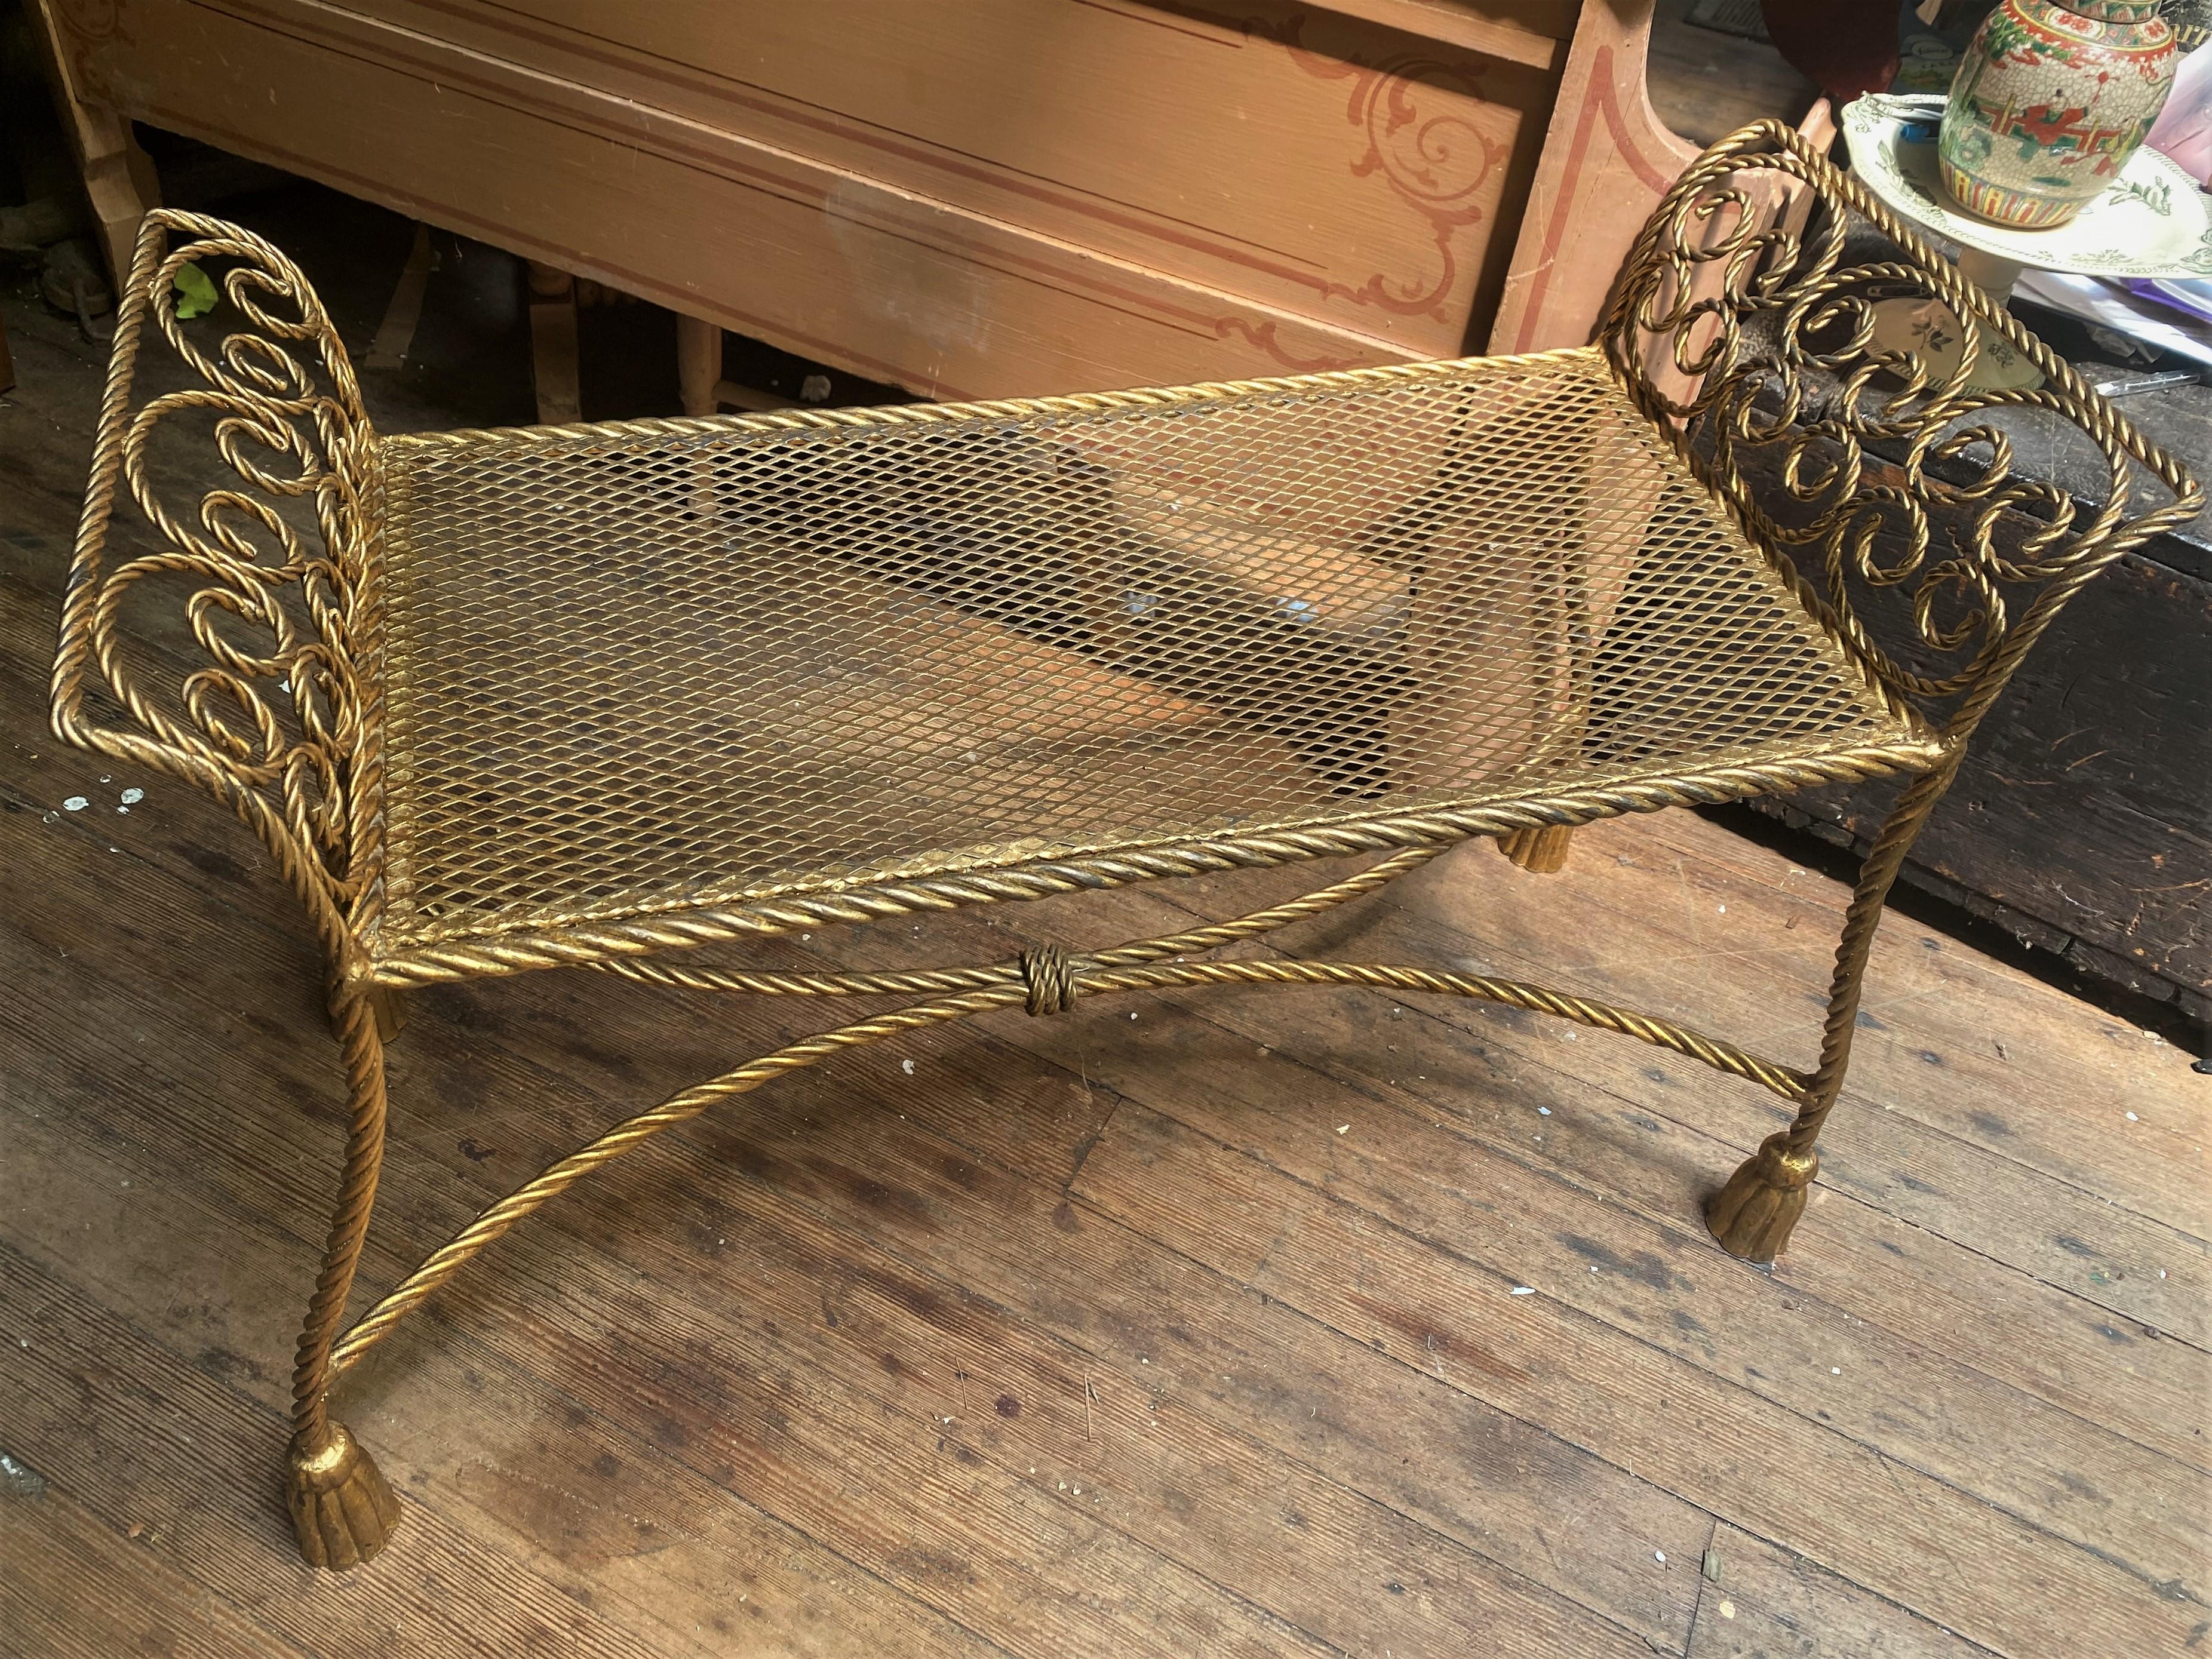 This is a very nice gold finished metal bench with rope twist around the outside, legs and swirled into an arched pattern on each end. The feet are fun gold faux tassels and the stretcher is also twisted rope design bound in the center. The seat is